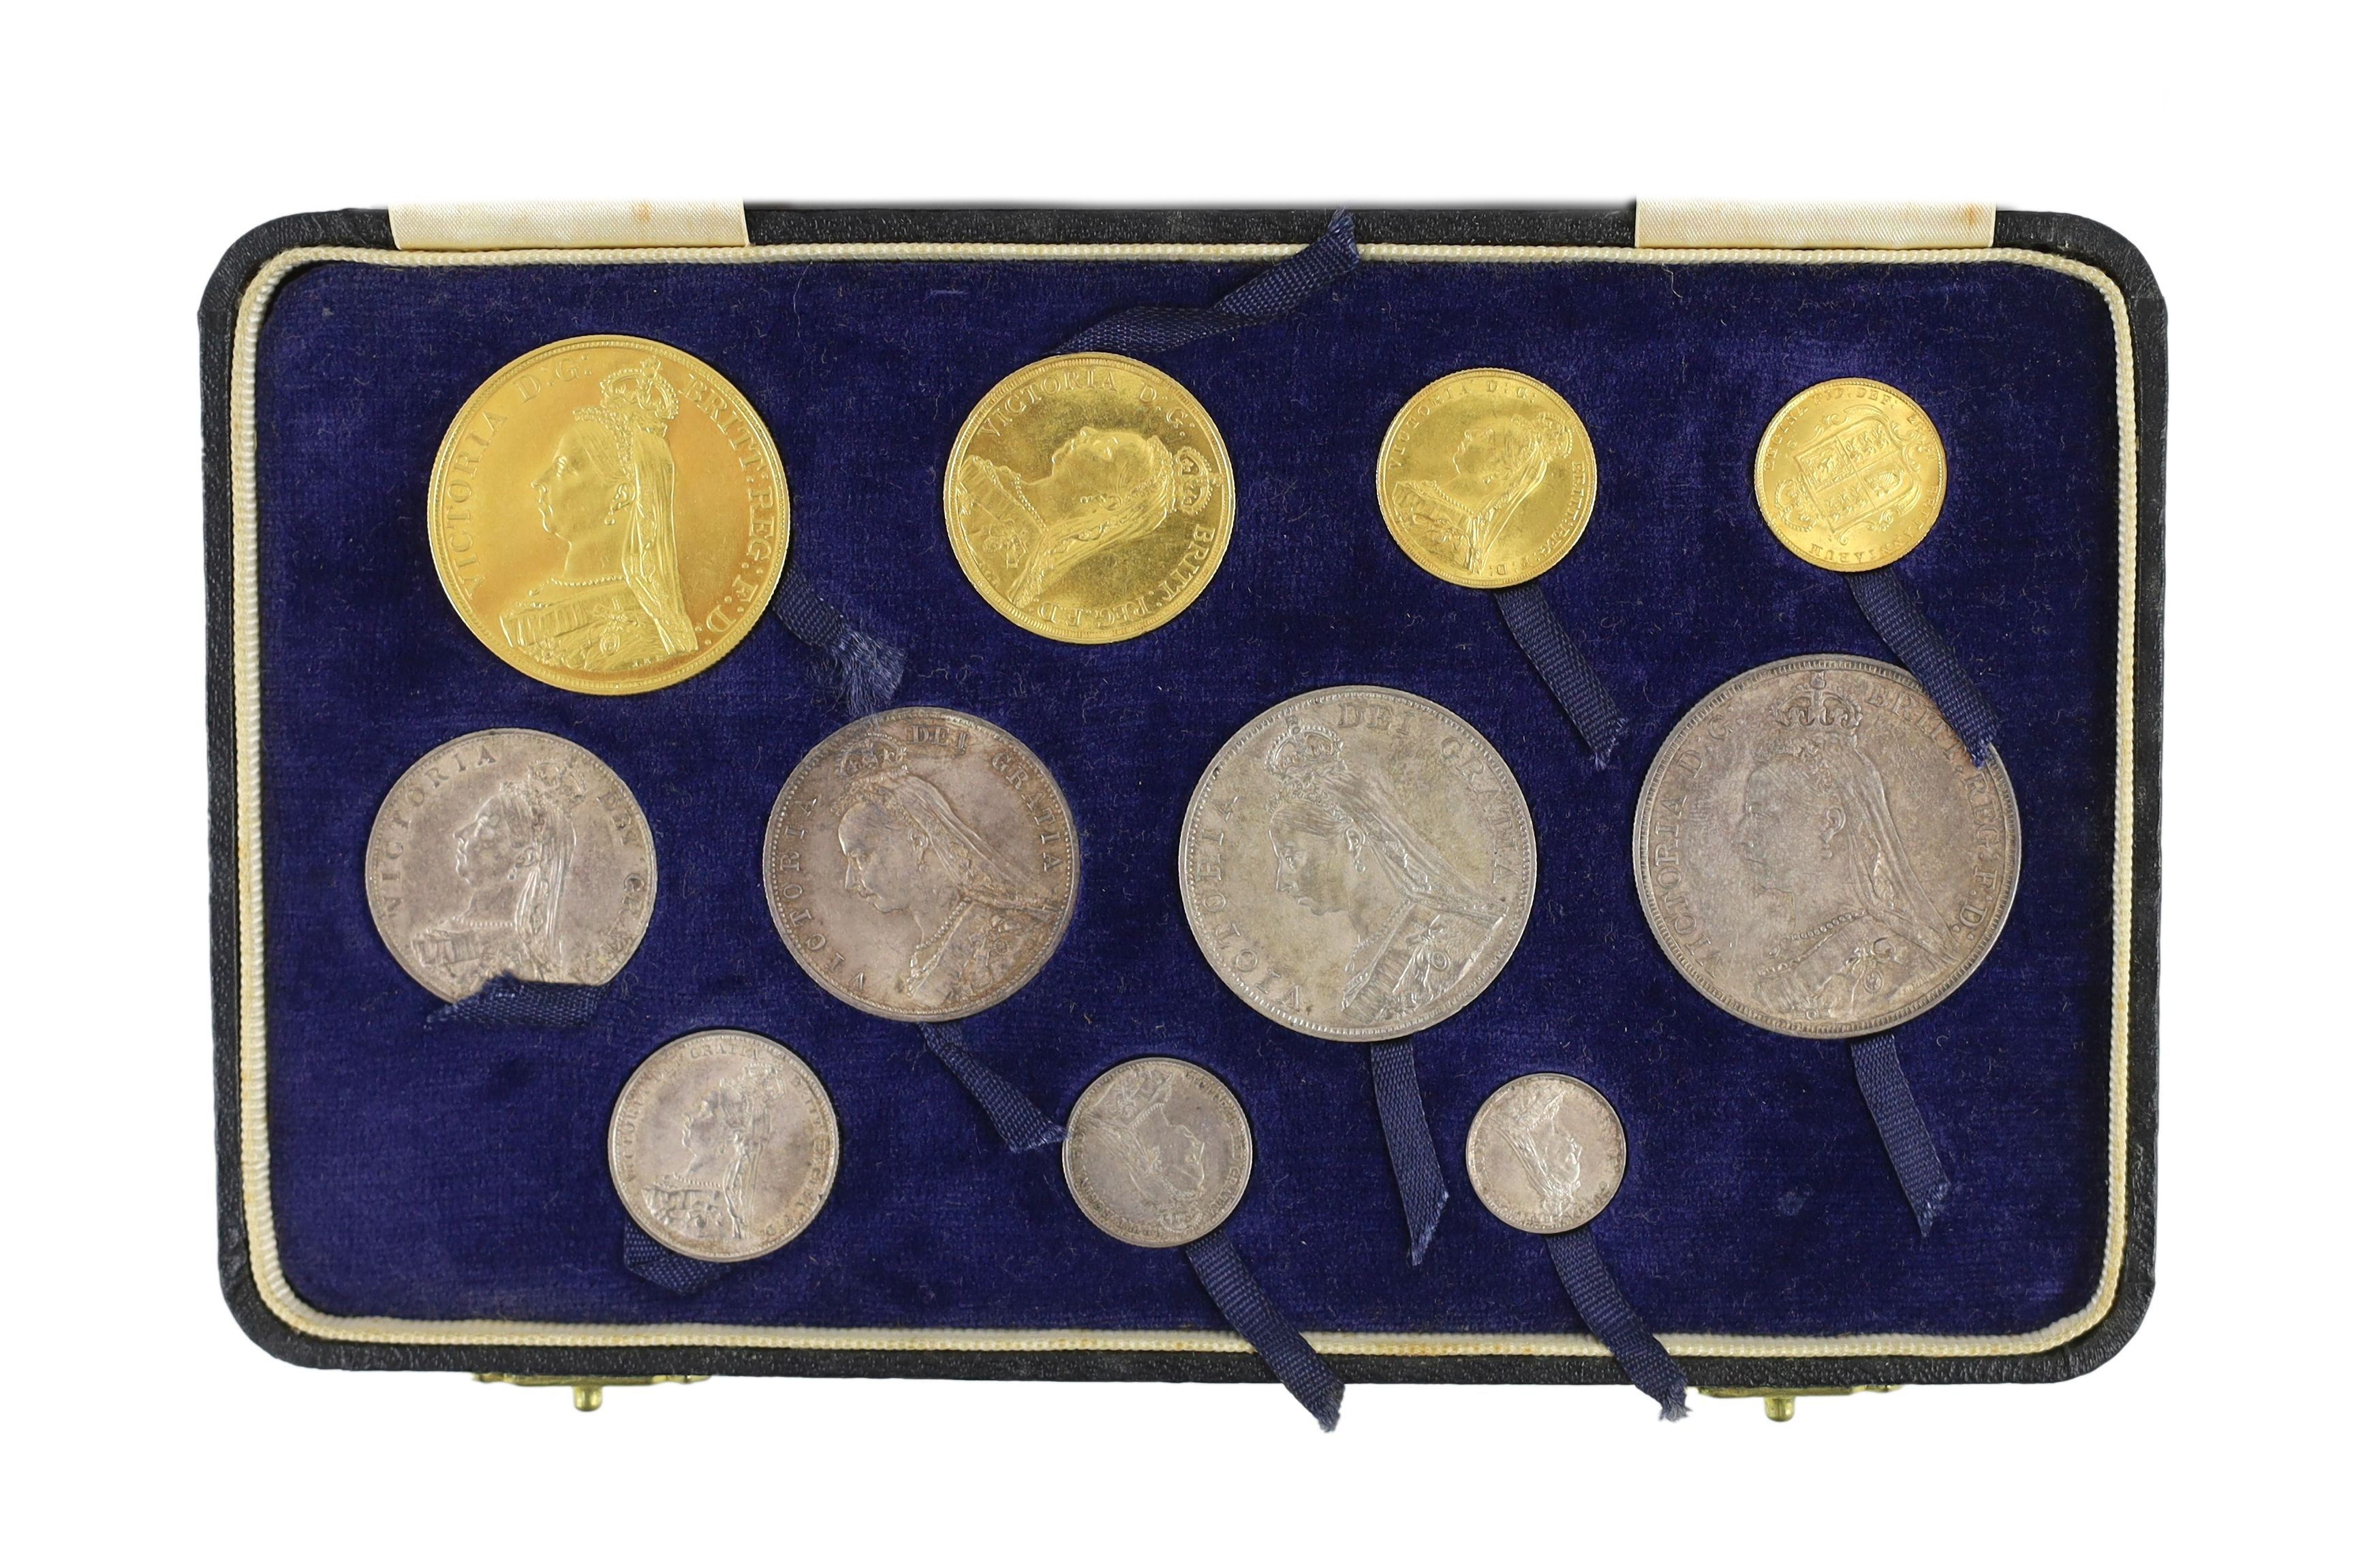 PLEASE NOTE THIS IS A SPECIMEN SET, UK coins, a cased Victoria 1887 Golden Jubilee gold and silver eleven coin set.